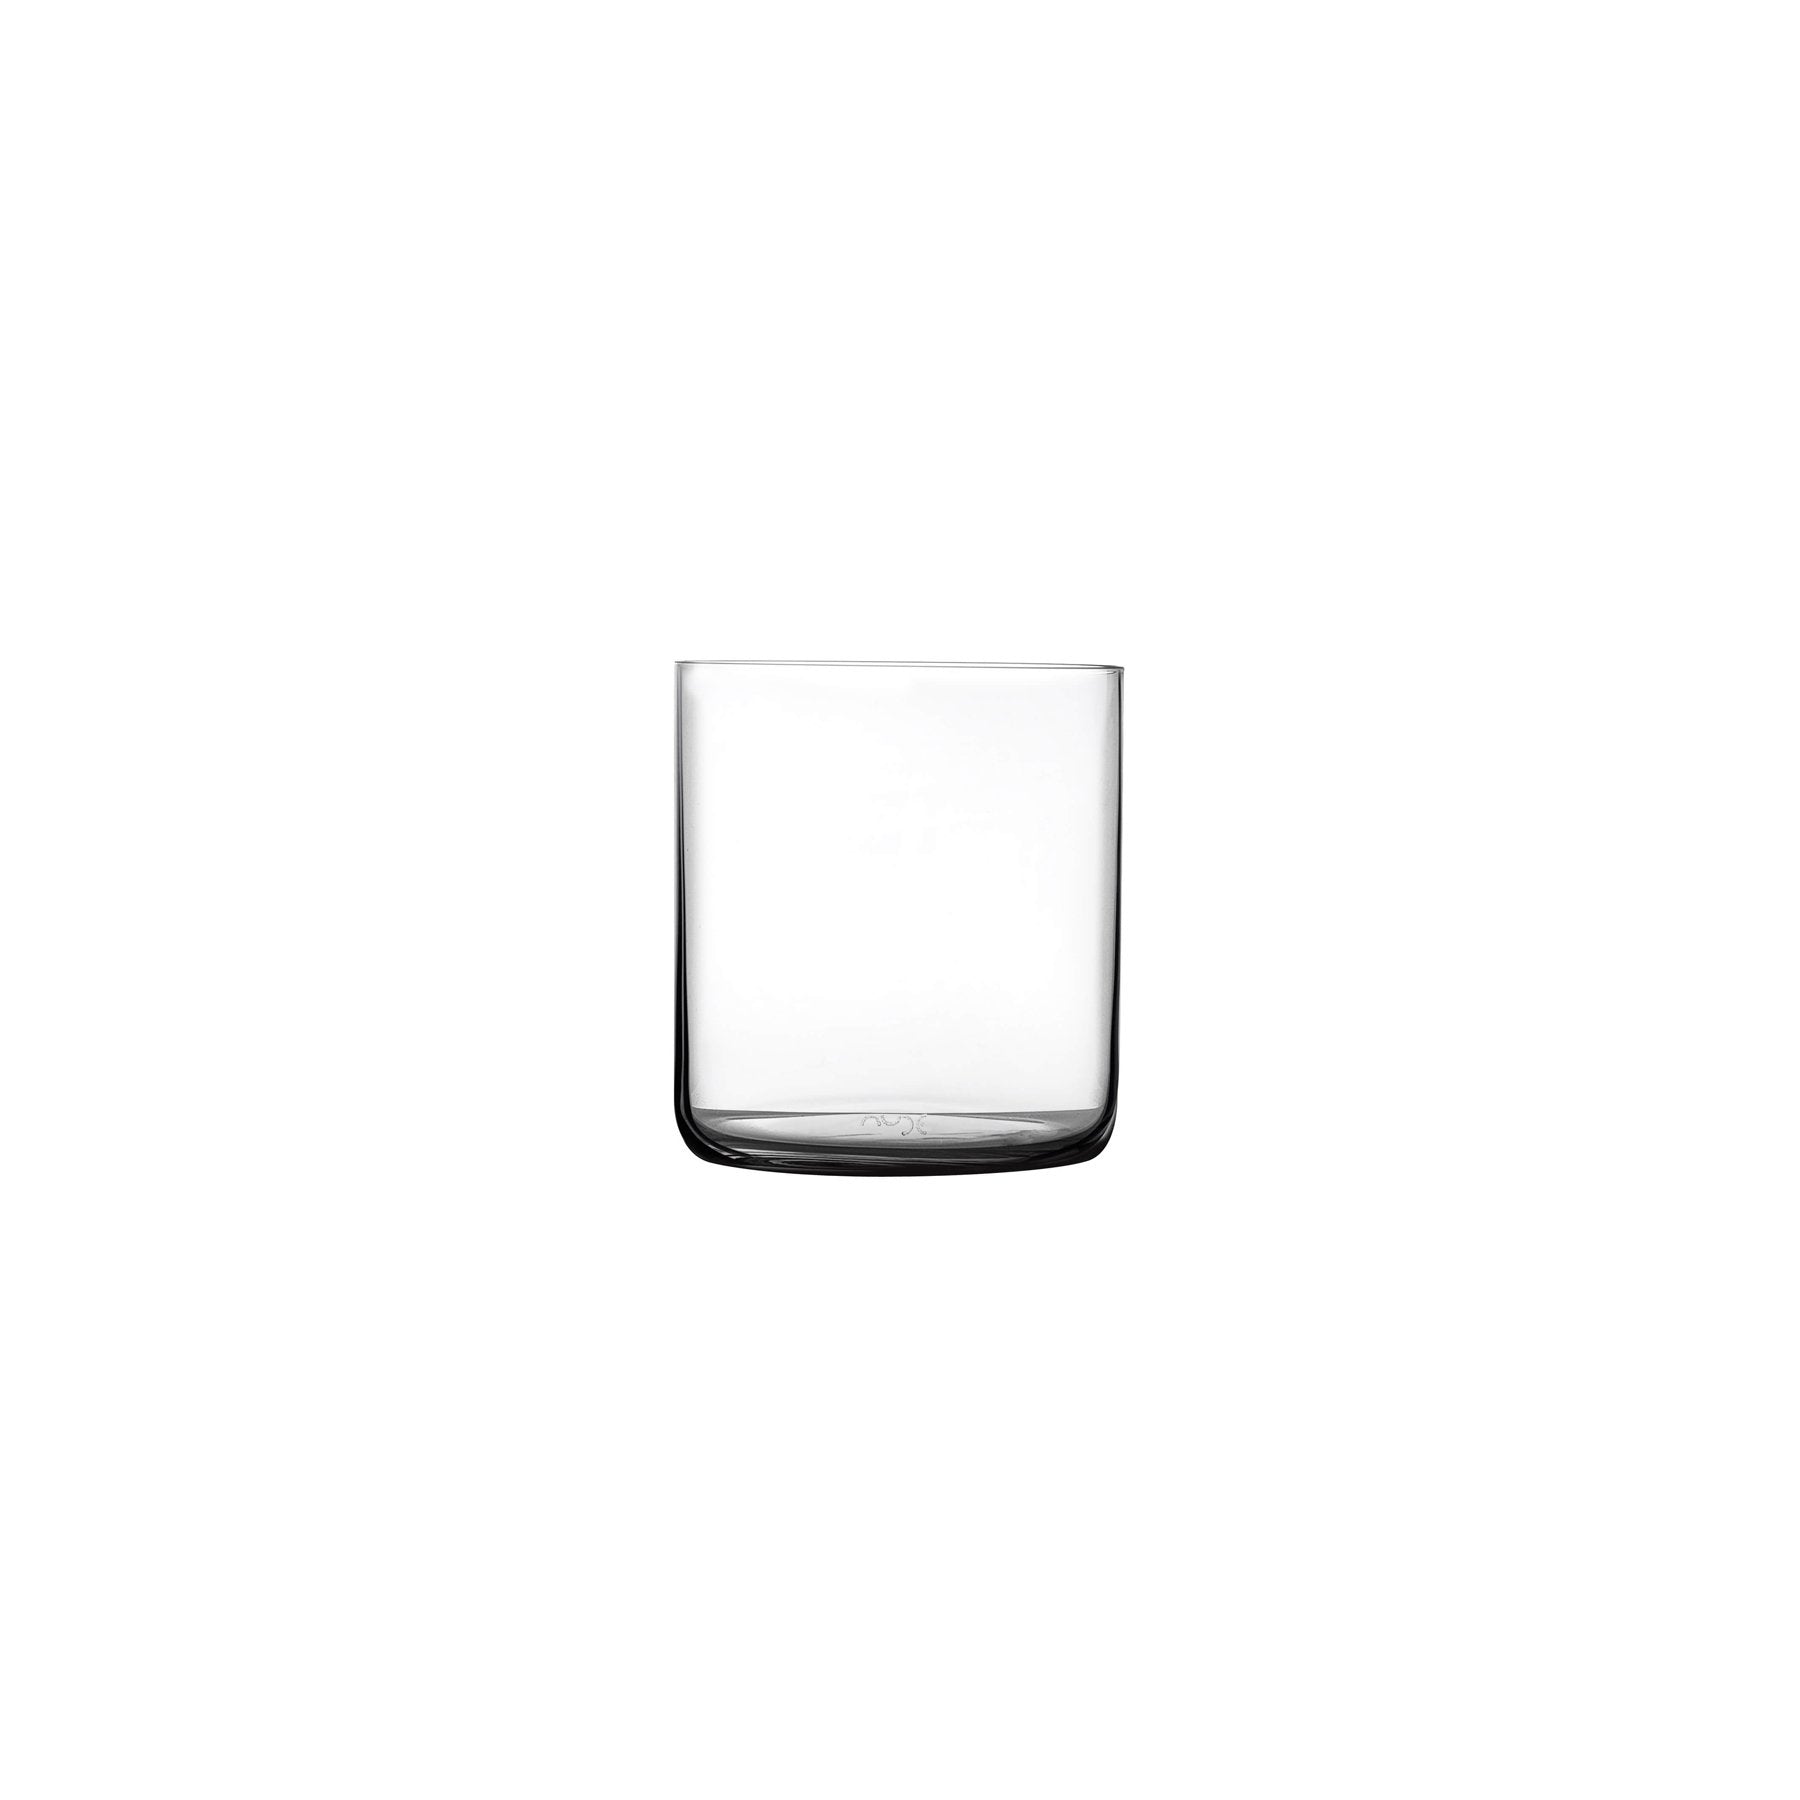 Nude Finese Grid Drinking Glasses (Set of 4)